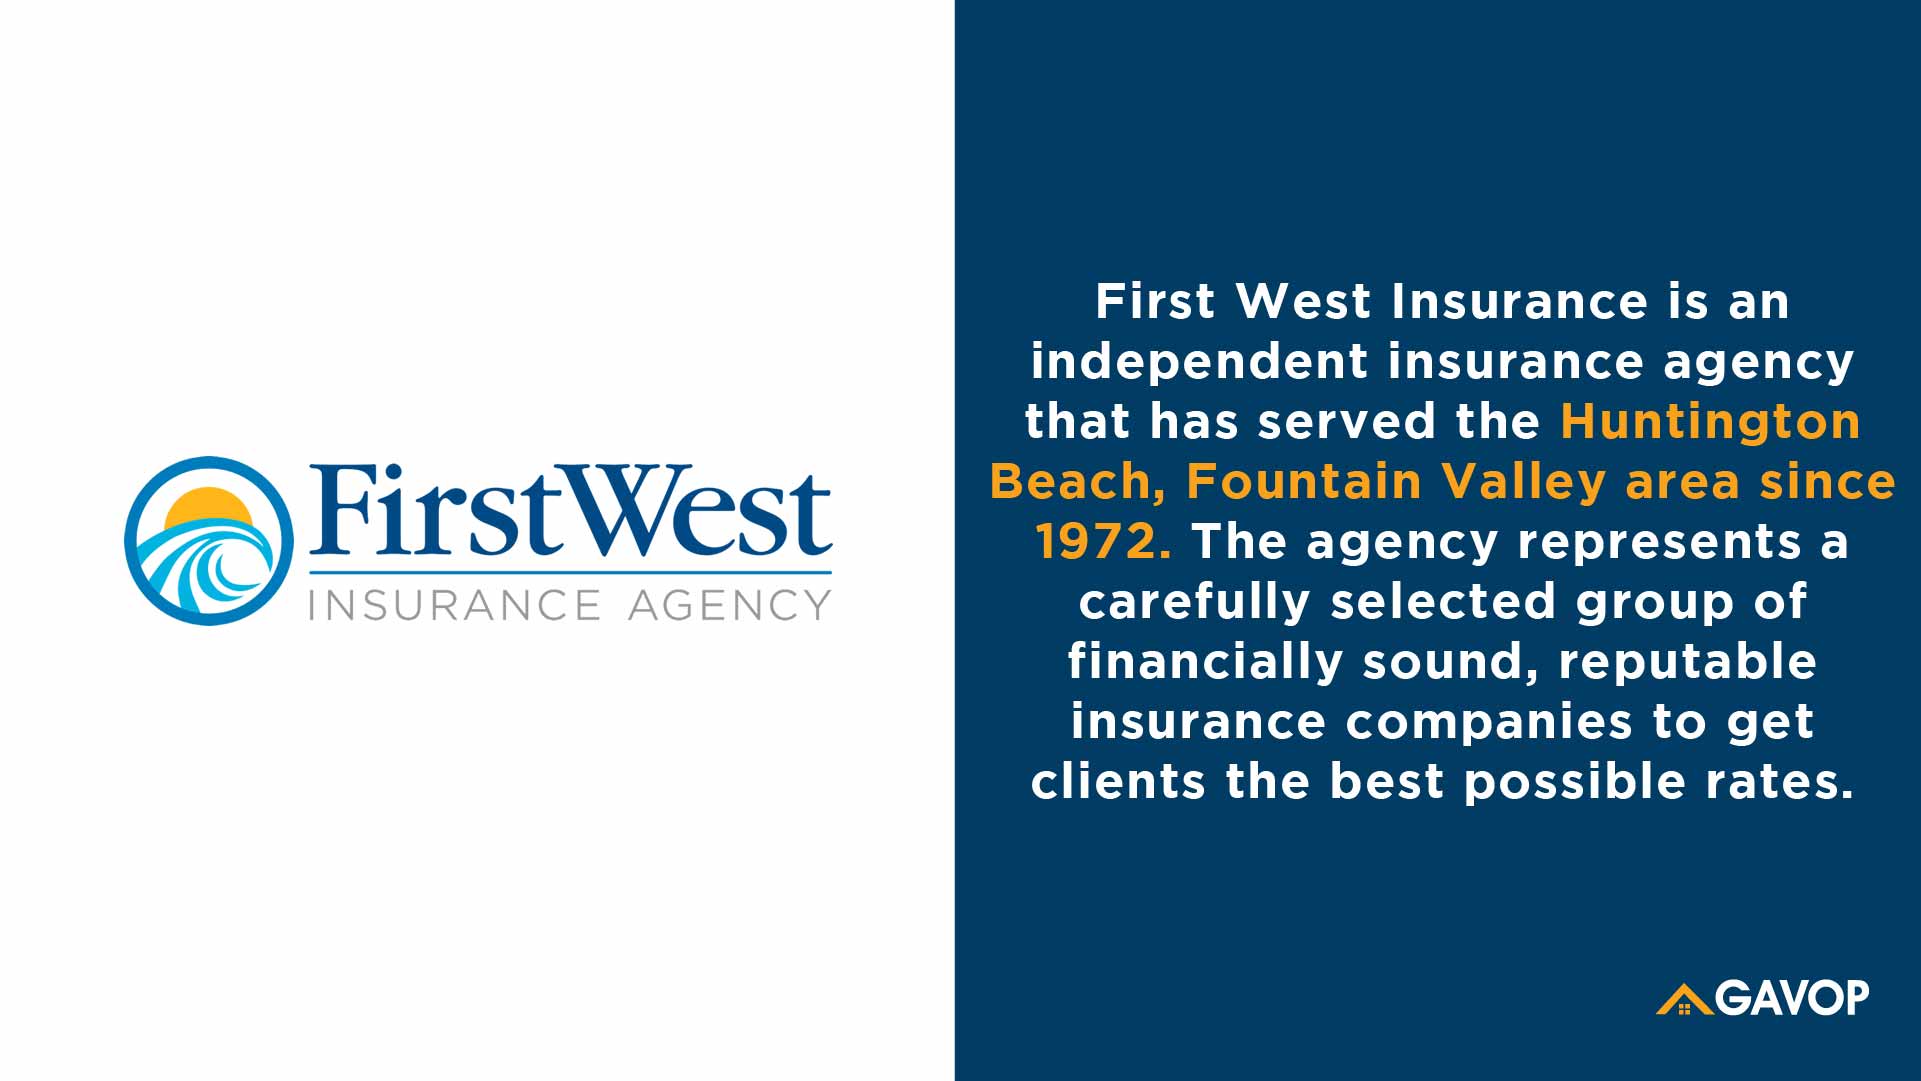 First West Insurance Agency